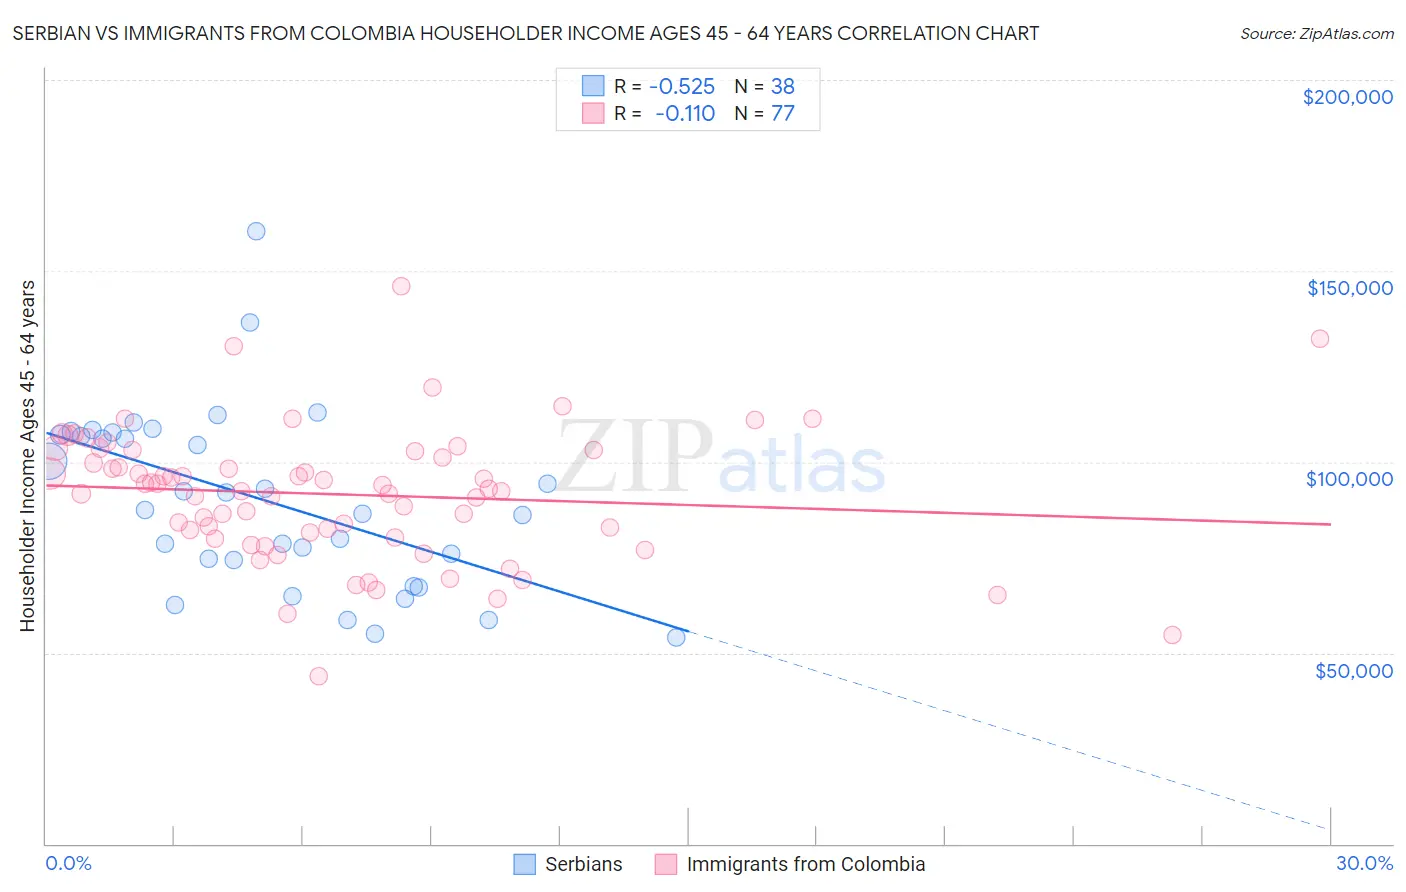 Serbian vs Immigrants from Colombia Householder Income Ages 45 - 64 years